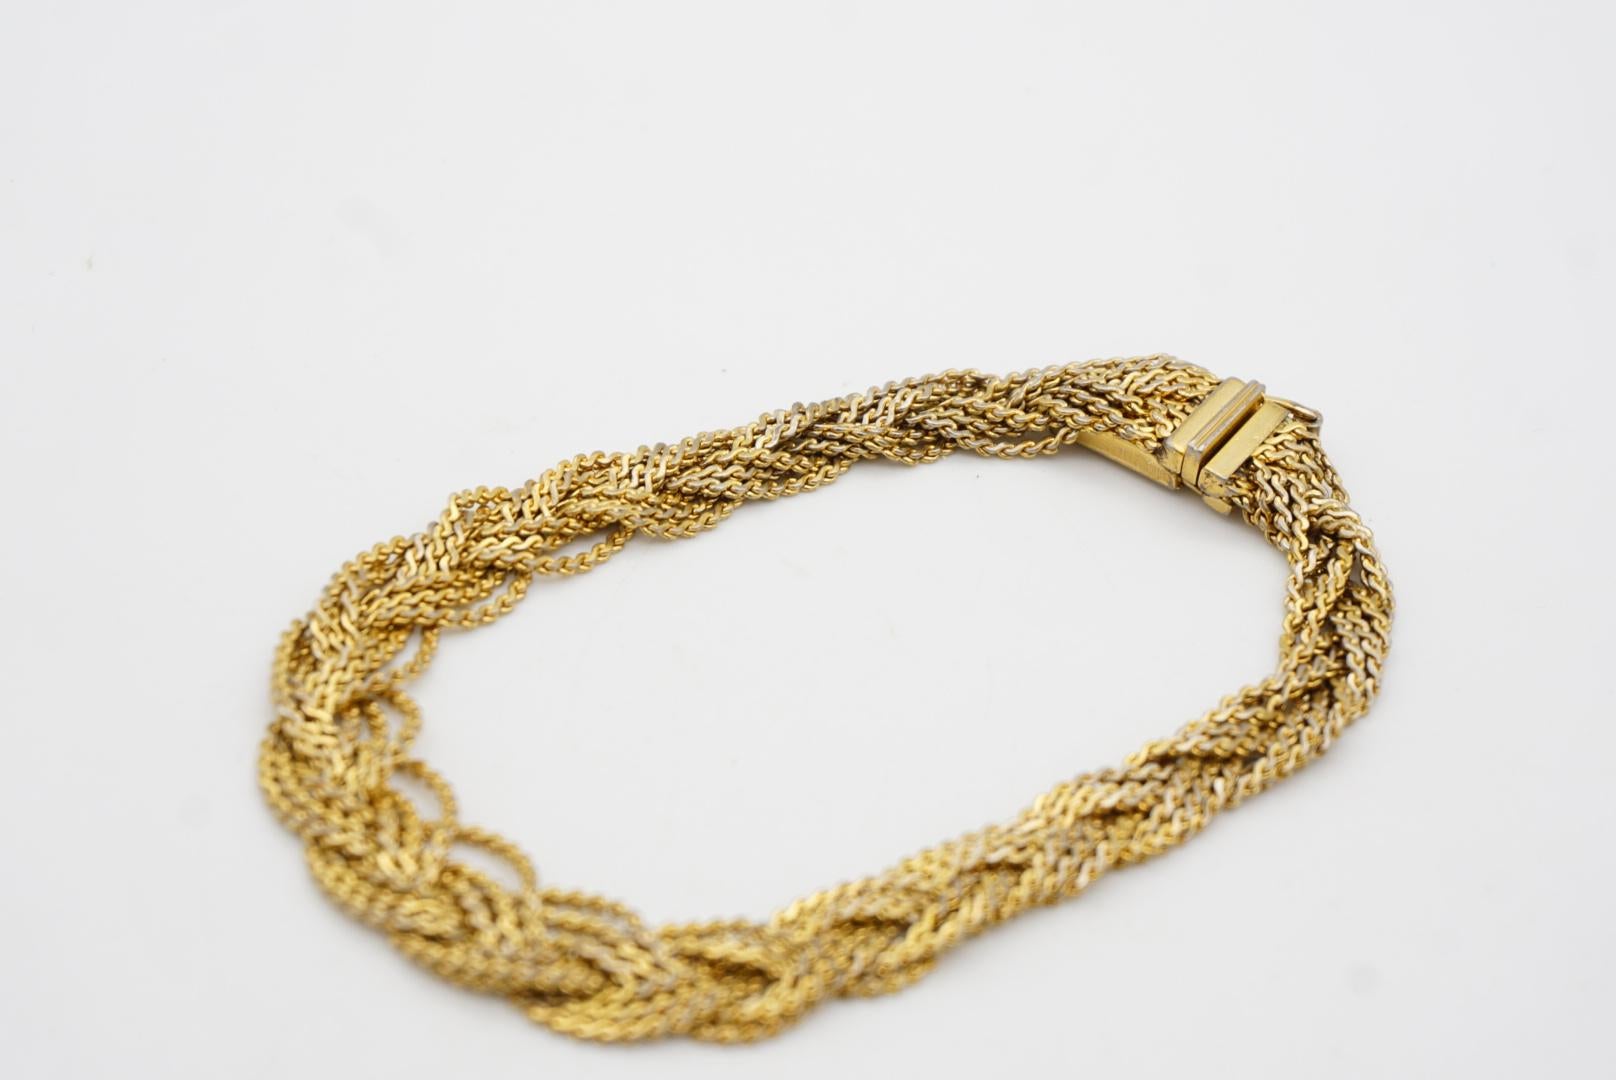 Christian Dior GROSSE 1963 Braided Woven Twisted 3 Triple Strands Rope Bracelet 2